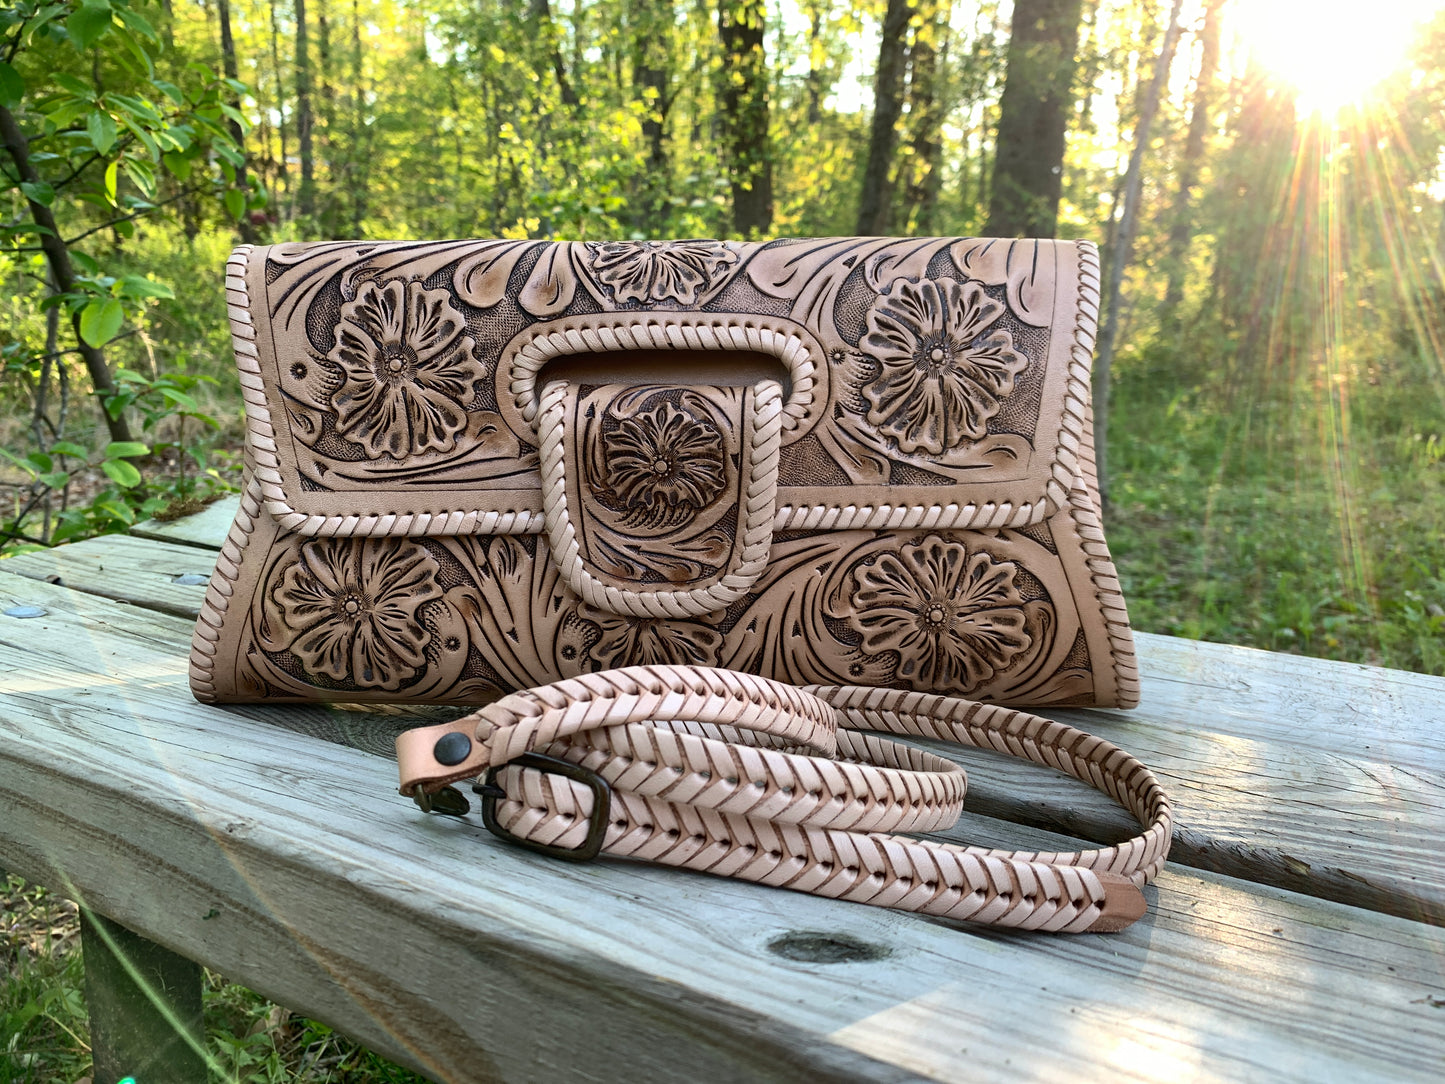 Hand-Tooled Leather Small Clutch & Crossbody "LENGUETA" by ALLE, more colors - ALLE Handbags